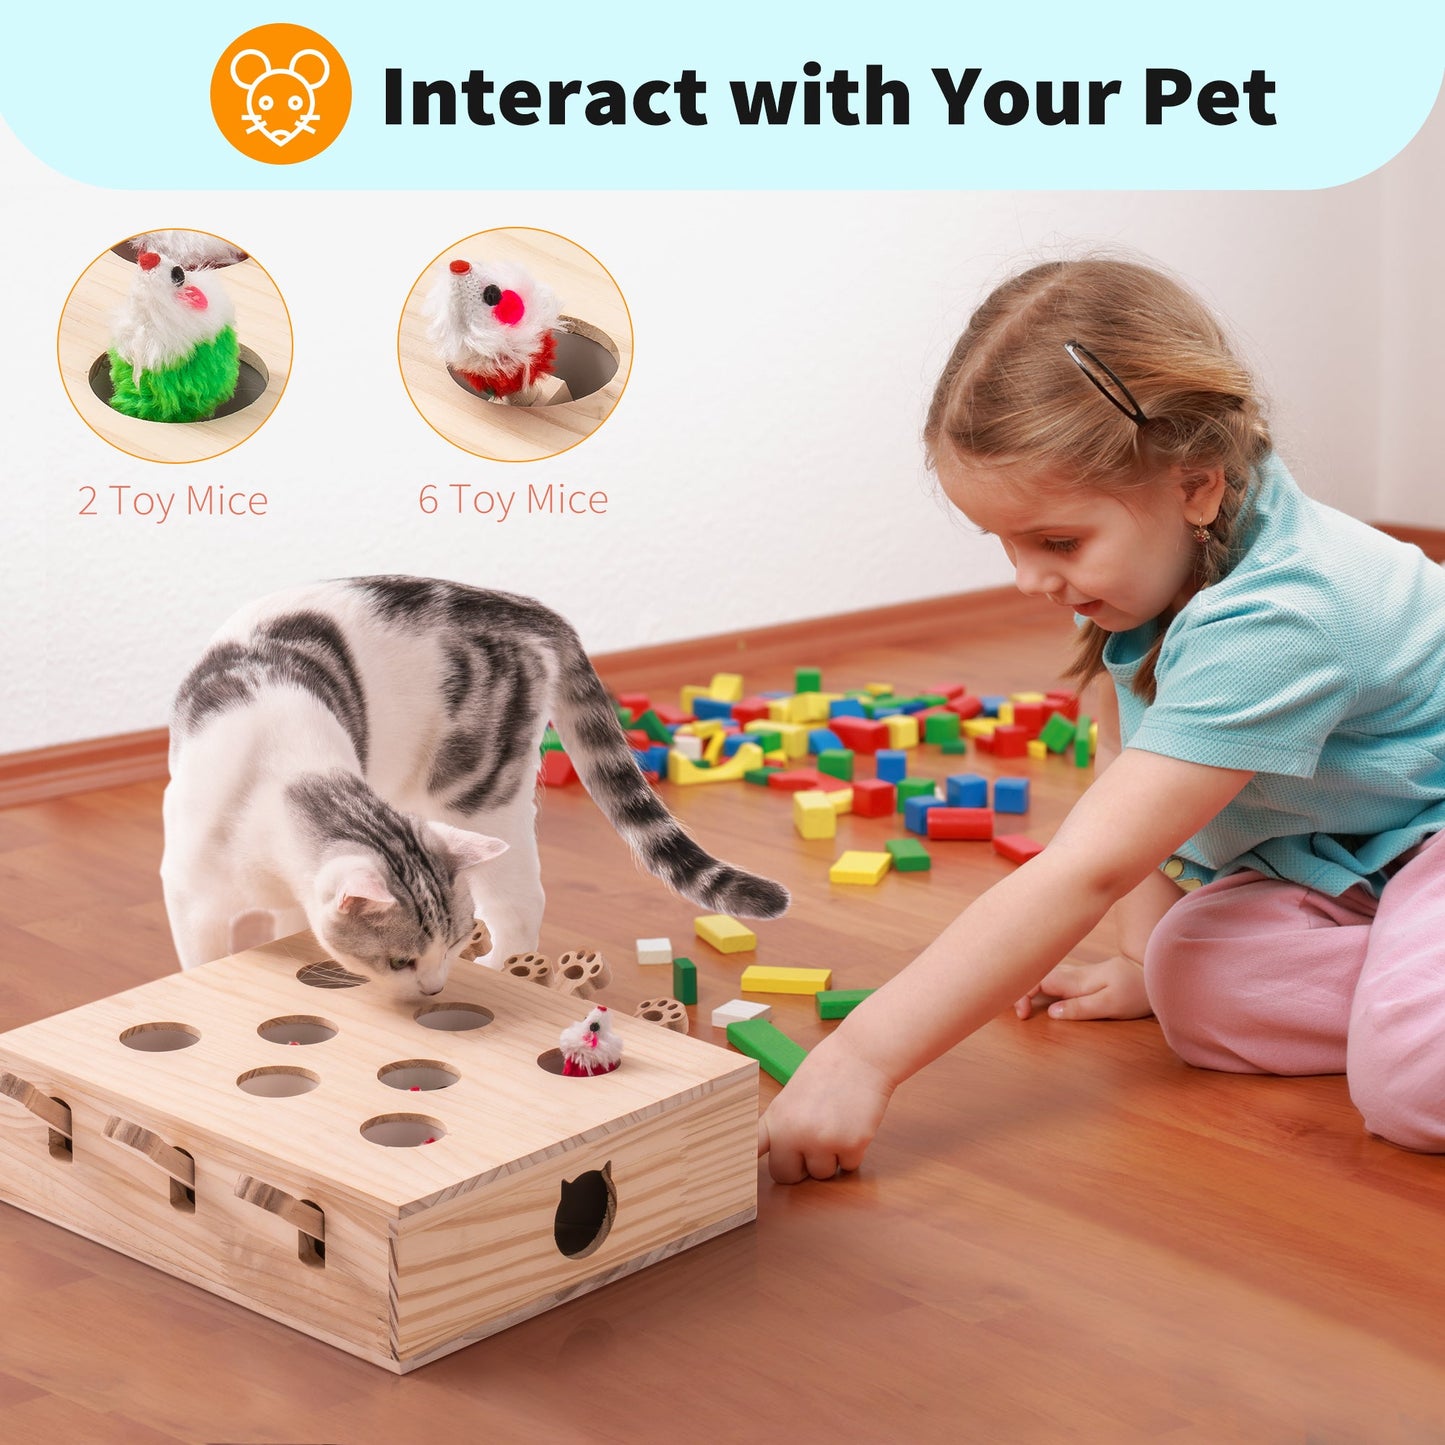 8 Holes Cat Toys - Its Meow or Never